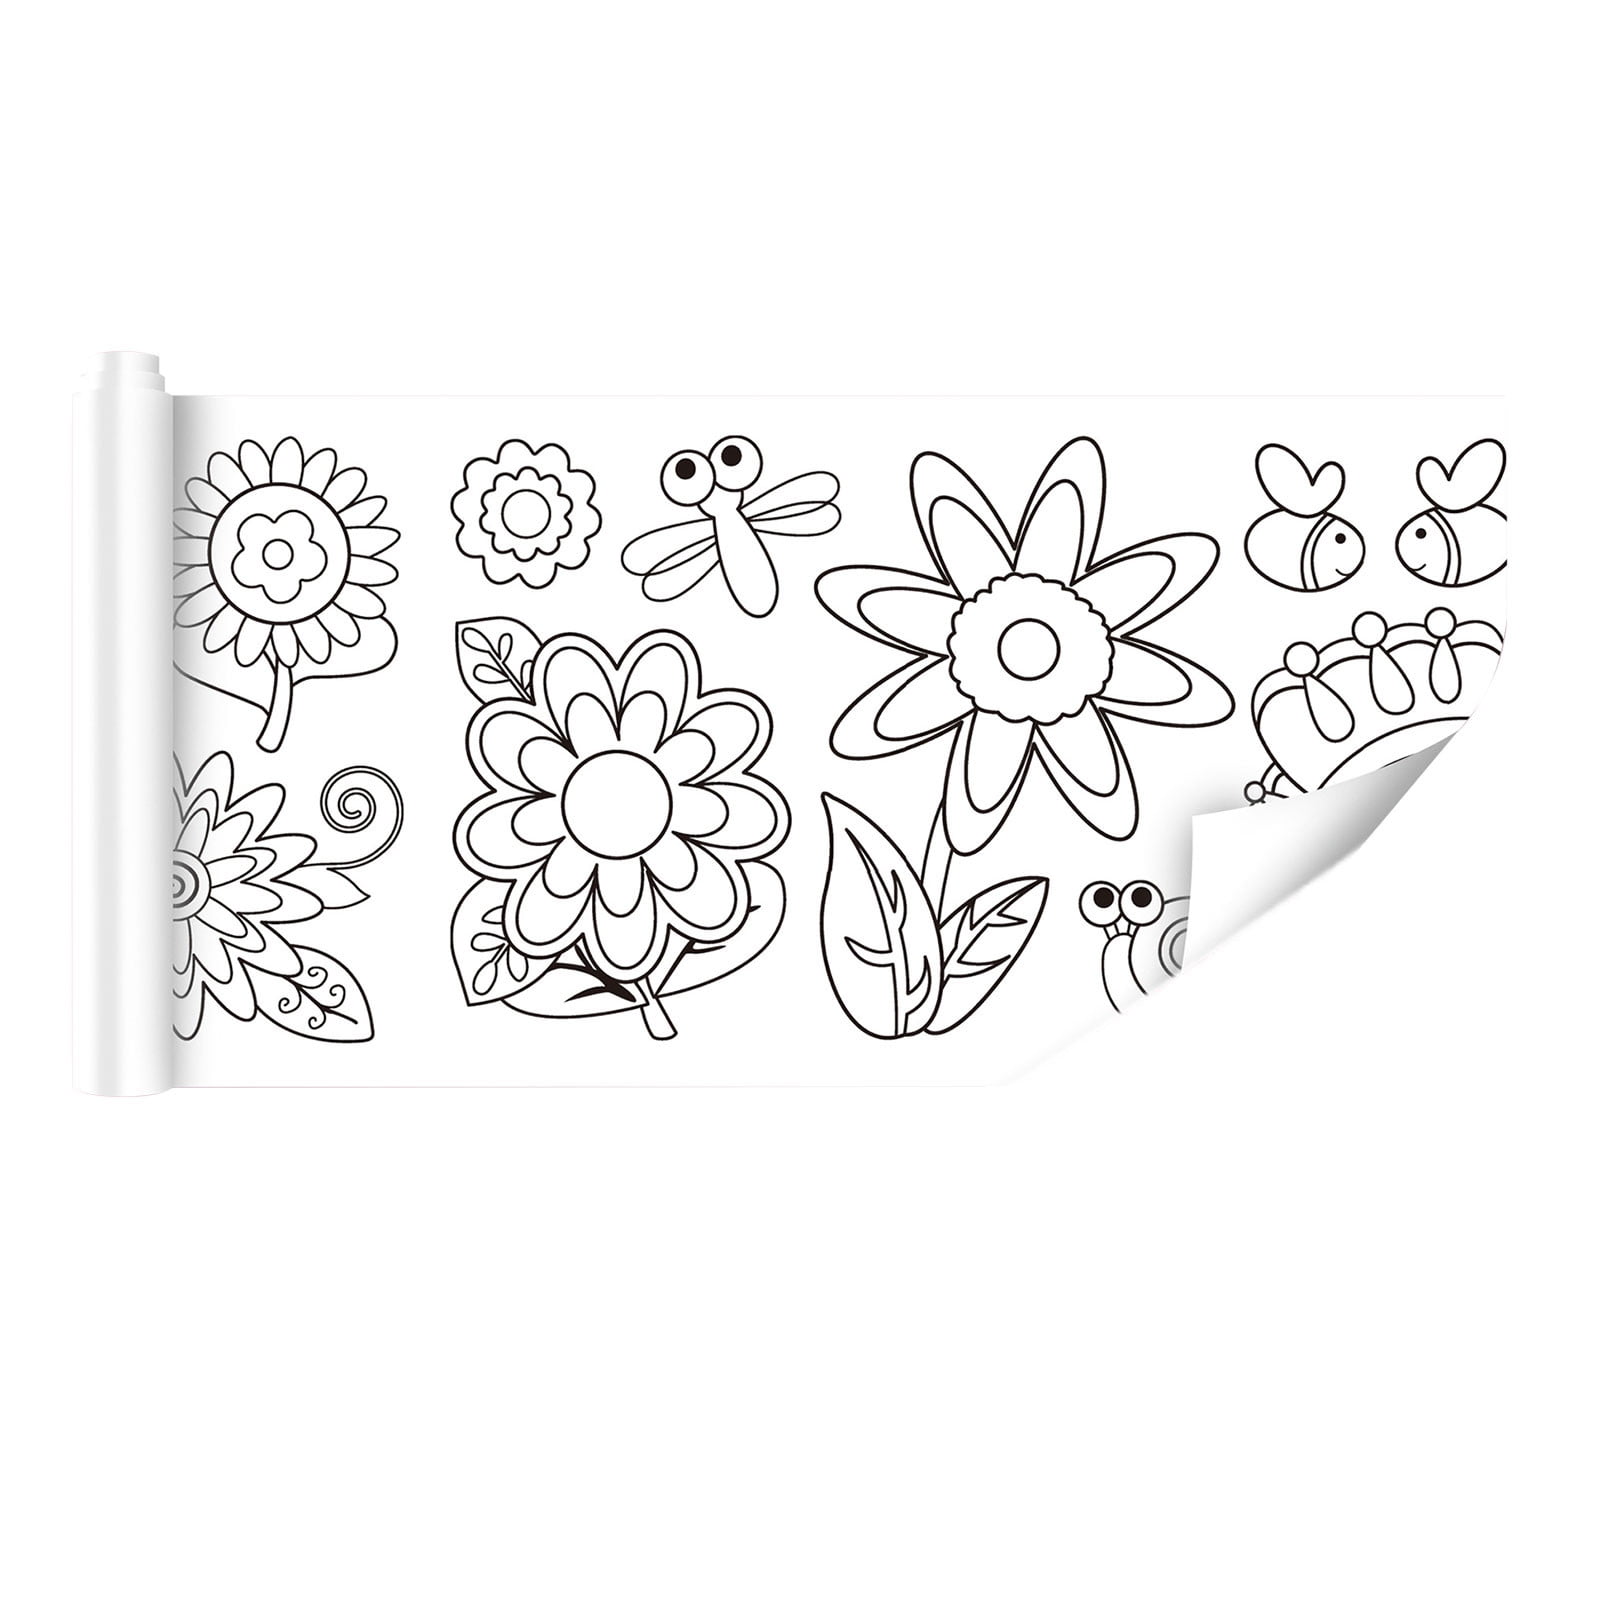 Children's Drawing Roll - Coloring Paper Roll for Kids, Drawing Paper Roll DIY Painting Drawing Color Filling Paper, 118 * 11.8 Inches, Size: 30